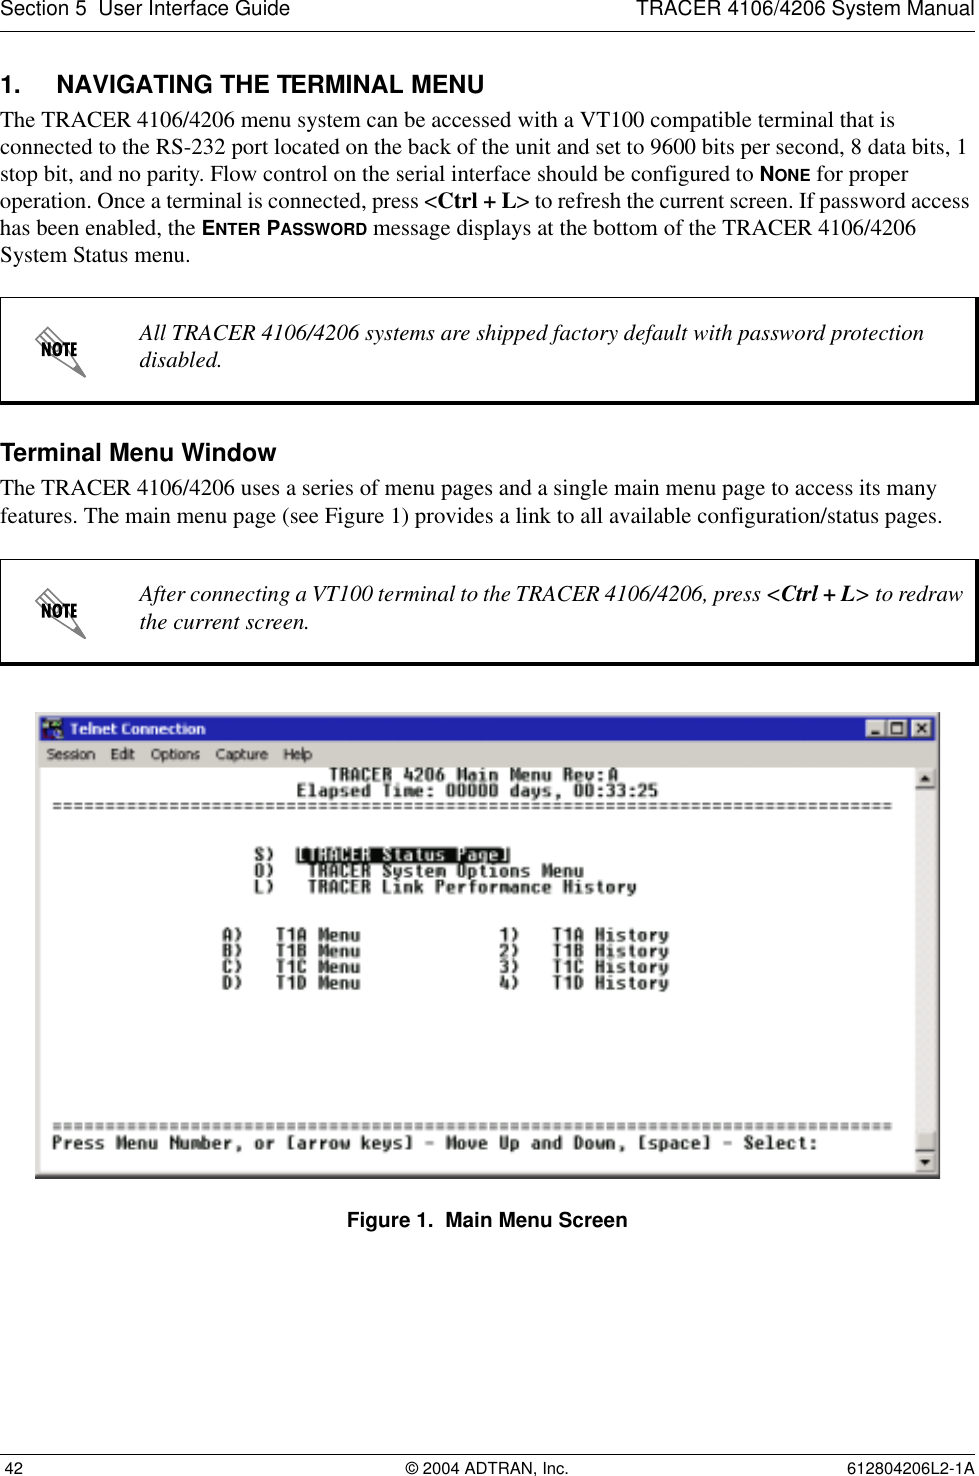 Section 5  User Interface Guide TRACER 4106/4206 System Manual 42 © 2004 ADTRAN, Inc. 612804206L2-1A1. NAVIGATING THE TERMINAL MENUThe TRACER 4106/4206 menu system can be accessed with a VT100 compatible terminal that is connected to the RS-232 port located on the back of the unit and set to 9600 bits per second, 8 data bits, 1 stop bit, and no parity. Flow control on the serial interface should be configured to NONE for proper operation. Once a terminal is connected, press &lt;Ctrl + L&gt; to refresh the current screen. If password access has been enabled, the ENTER PASSWORD message displays at the bottom of the TRACER 4106/4206 System Status menu. Terminal Menu WindowThe TRACER 4106/4206 uses a series of menu pages and a single main menu page to access its many features. The main menu page (see Figure 1) provides a link to all available configuration/status pages.Figure 1.  Main Menu ScreenAll TRACER 4106/4206 systems are shipped factory default with password protection disabled.After connecting a VT100 terminal to the TRACER 4106/4206, press &lt;Ctrl + L&gt; to redraw the current screen.